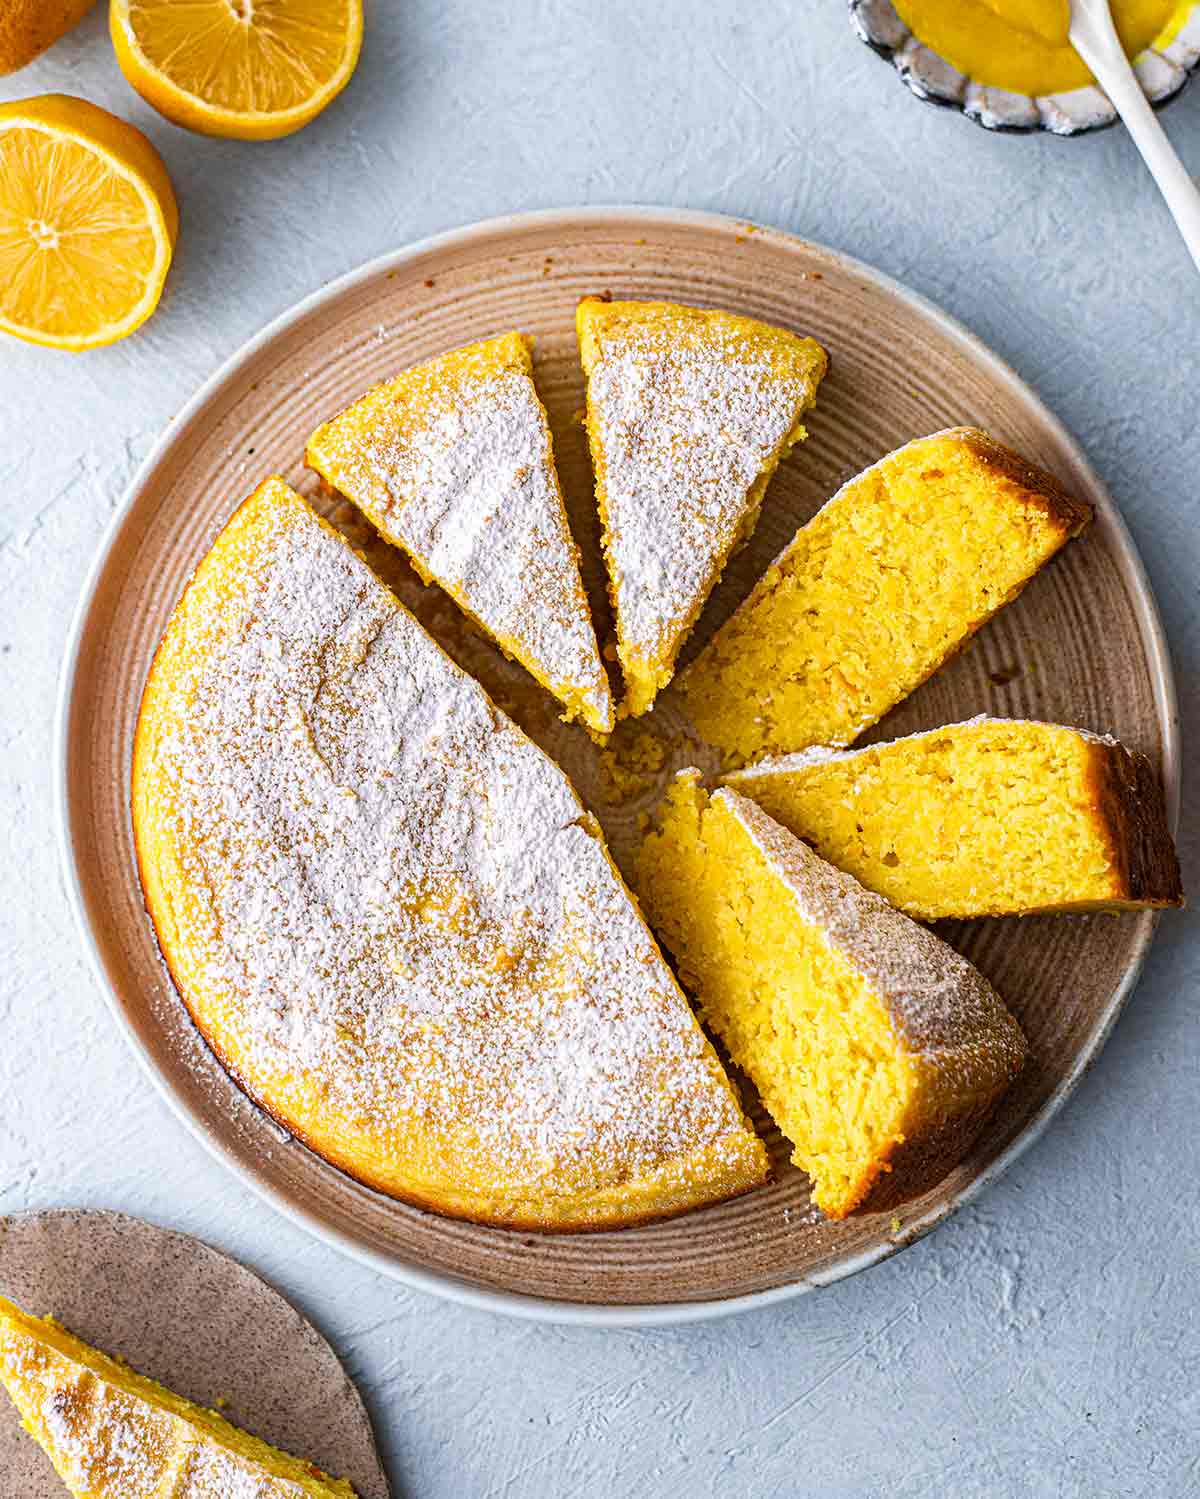 Lemon cake on plate with slices coming out.